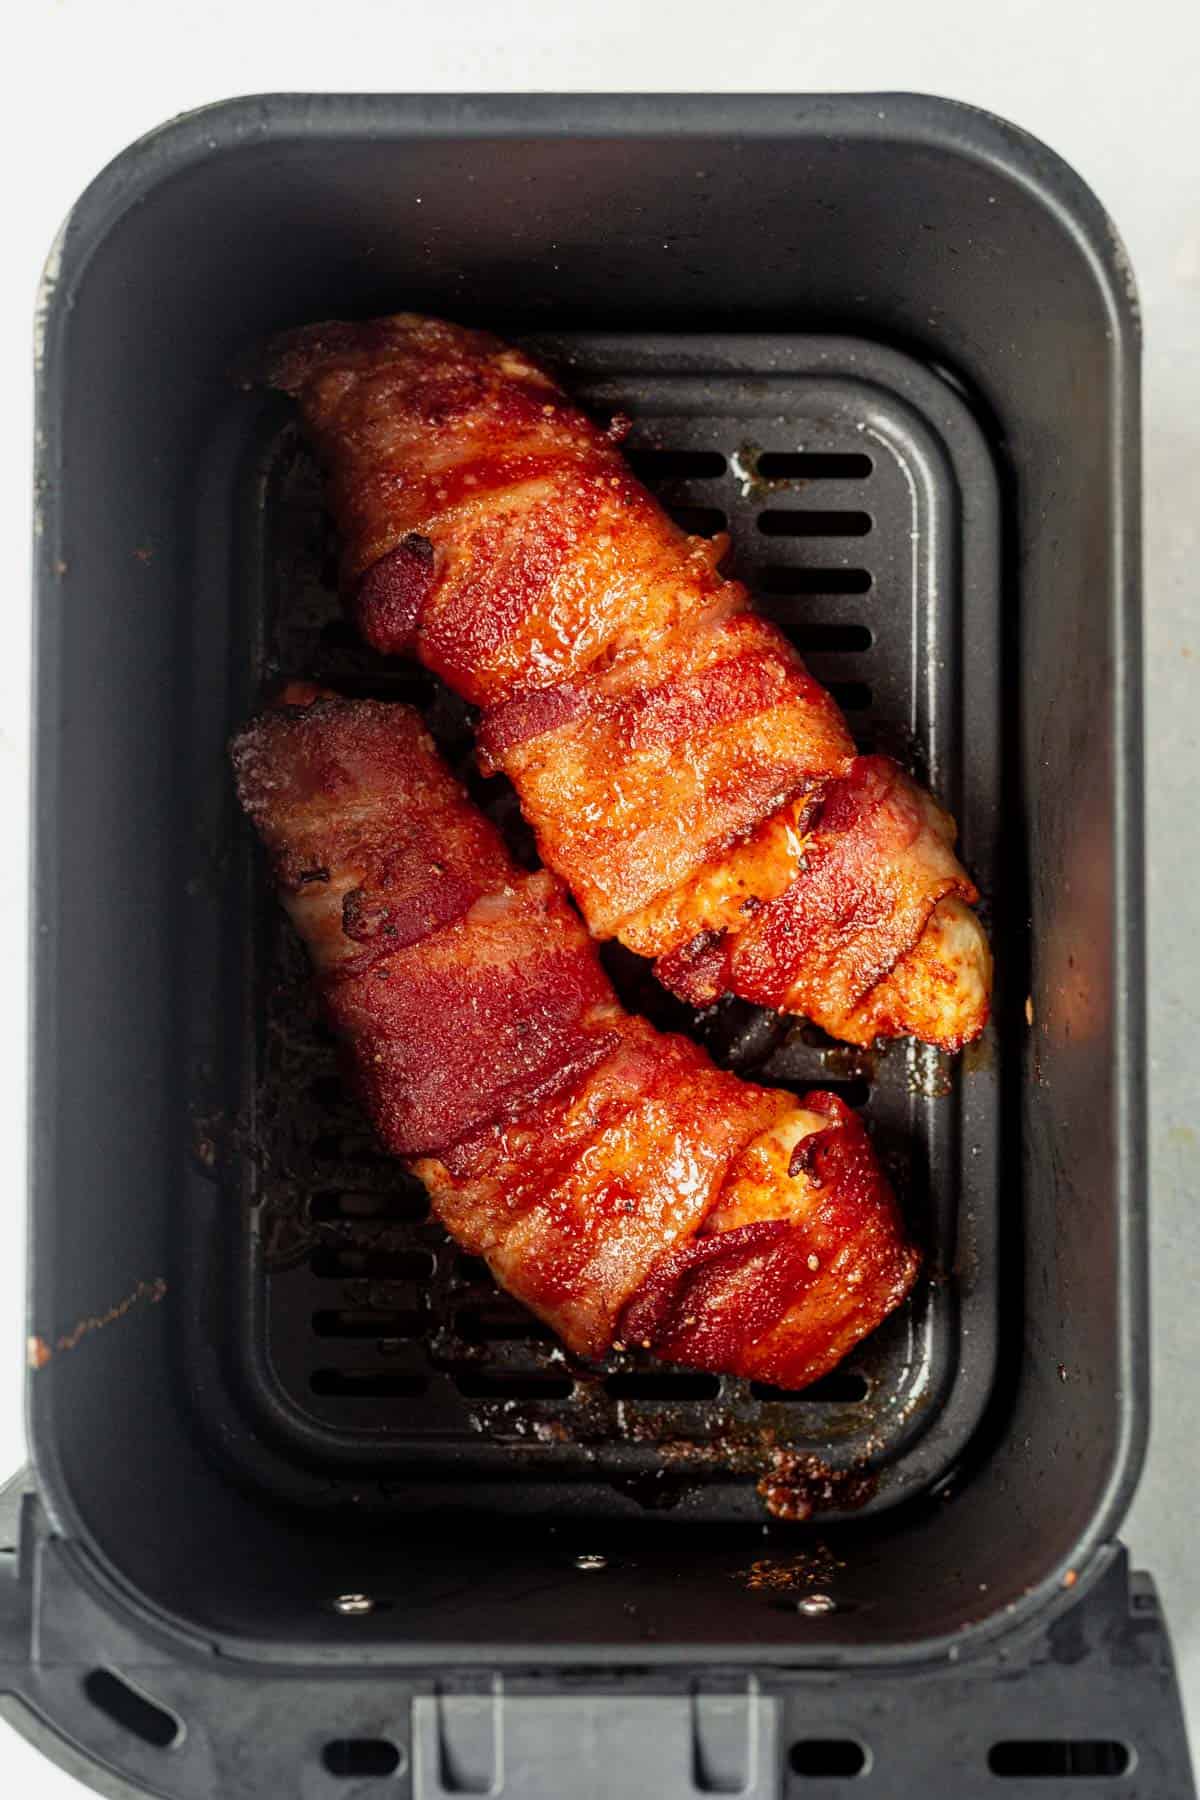 two bacon wrapped chicken breasts cooked and crispy in an air fryer basket